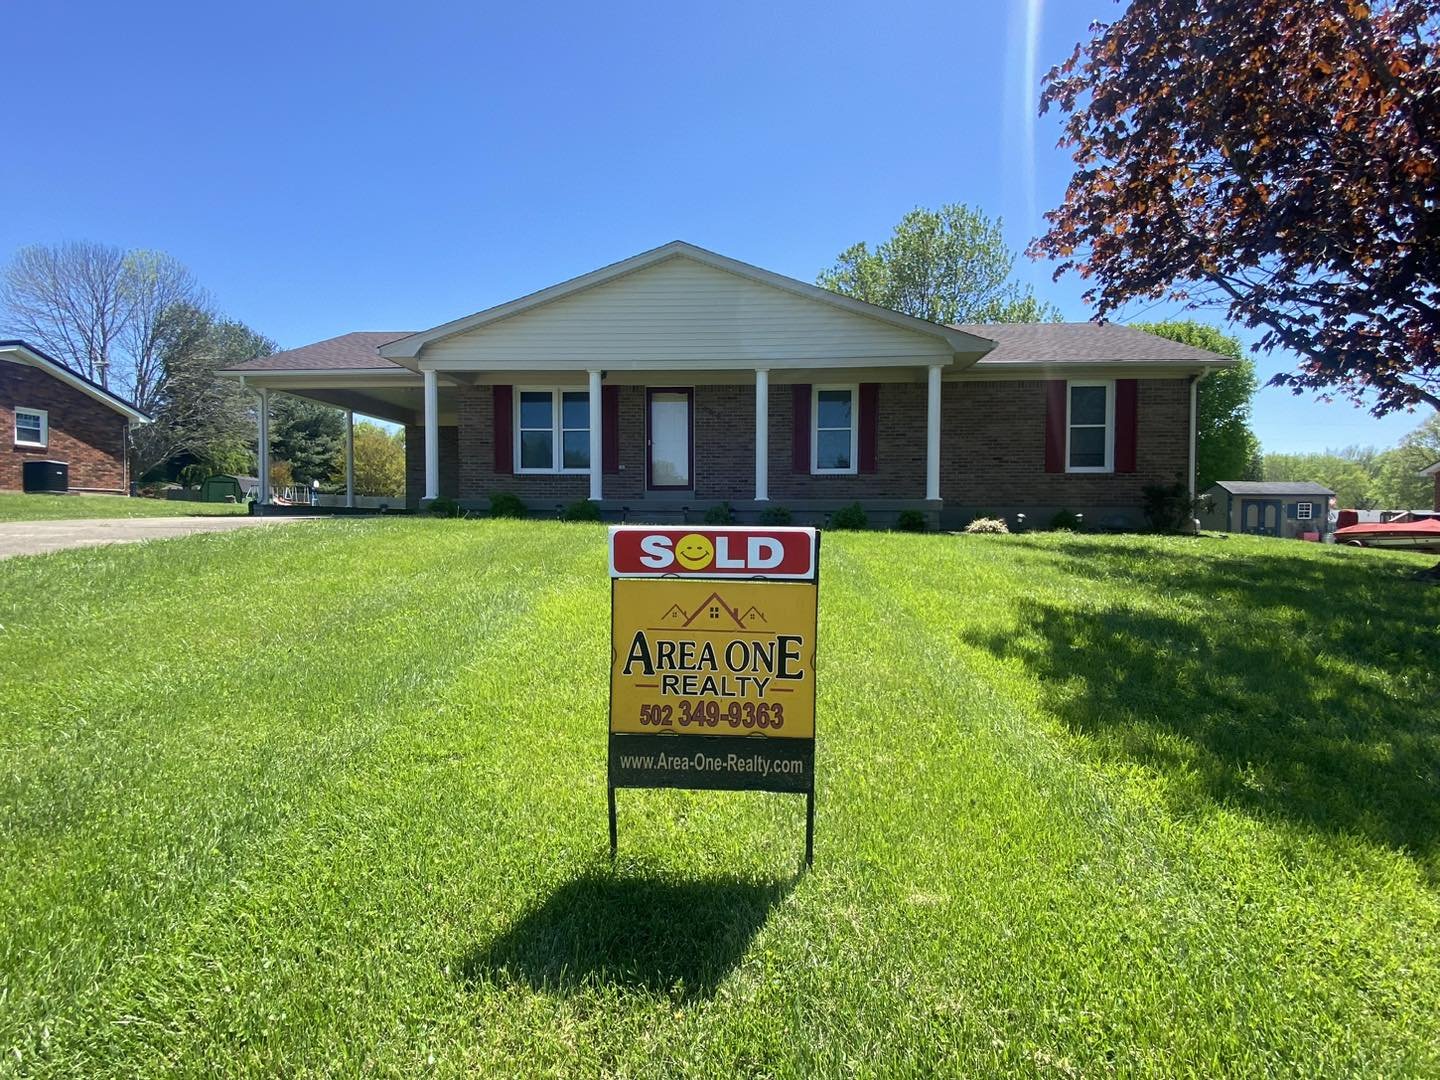 🎉 SOLD 🎈 SOLD 🏡  SOLD 🎊  SOLD 🎉
Another wonderful Bardstown home 🏡 SOLD by Mike &amp; Kathy Ballard of Area One Realty at 125 Meadow Lane!!! Thank you to our great seller for choosing Area One Realty to get your home 🏡 SOLD!

We can get your h